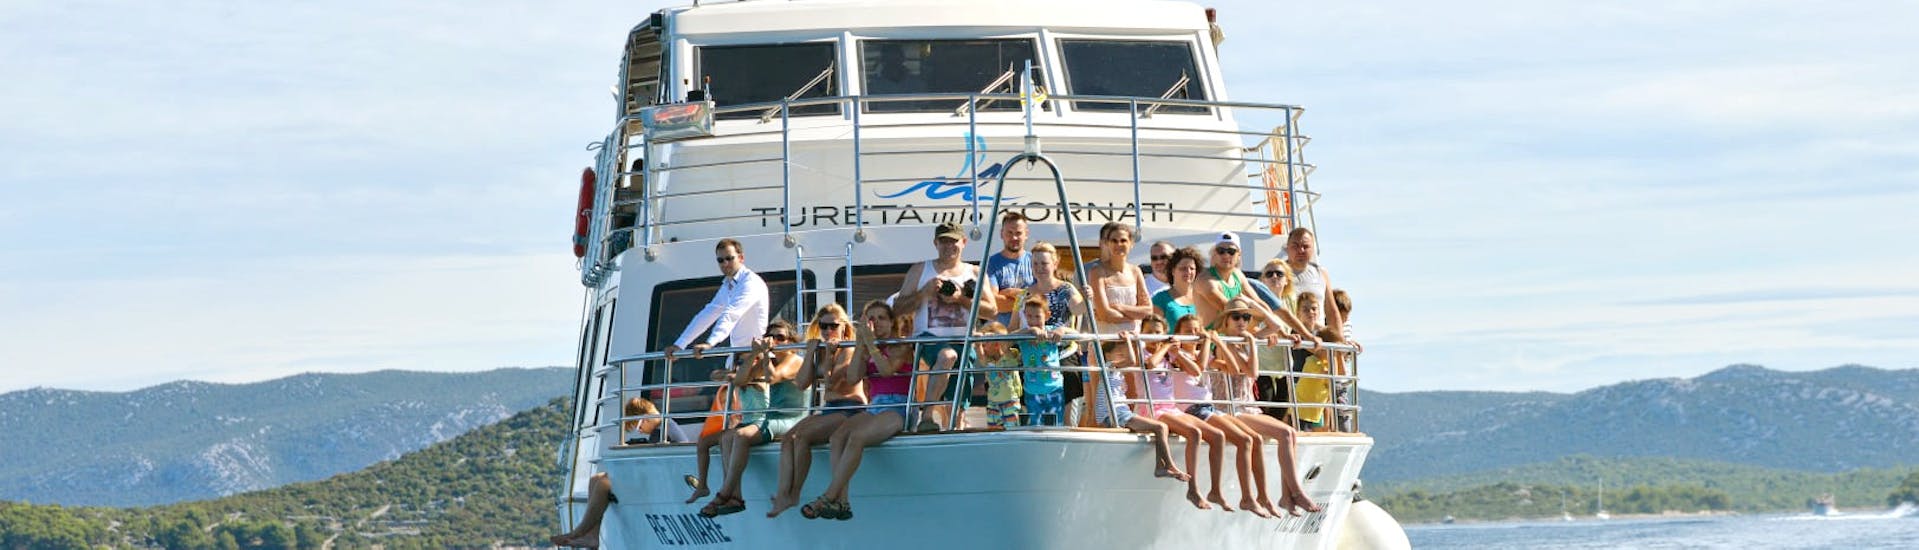 People on the boat from Tureta Tours Murter during the Boat Trip around the Kornati National Park from Murter.